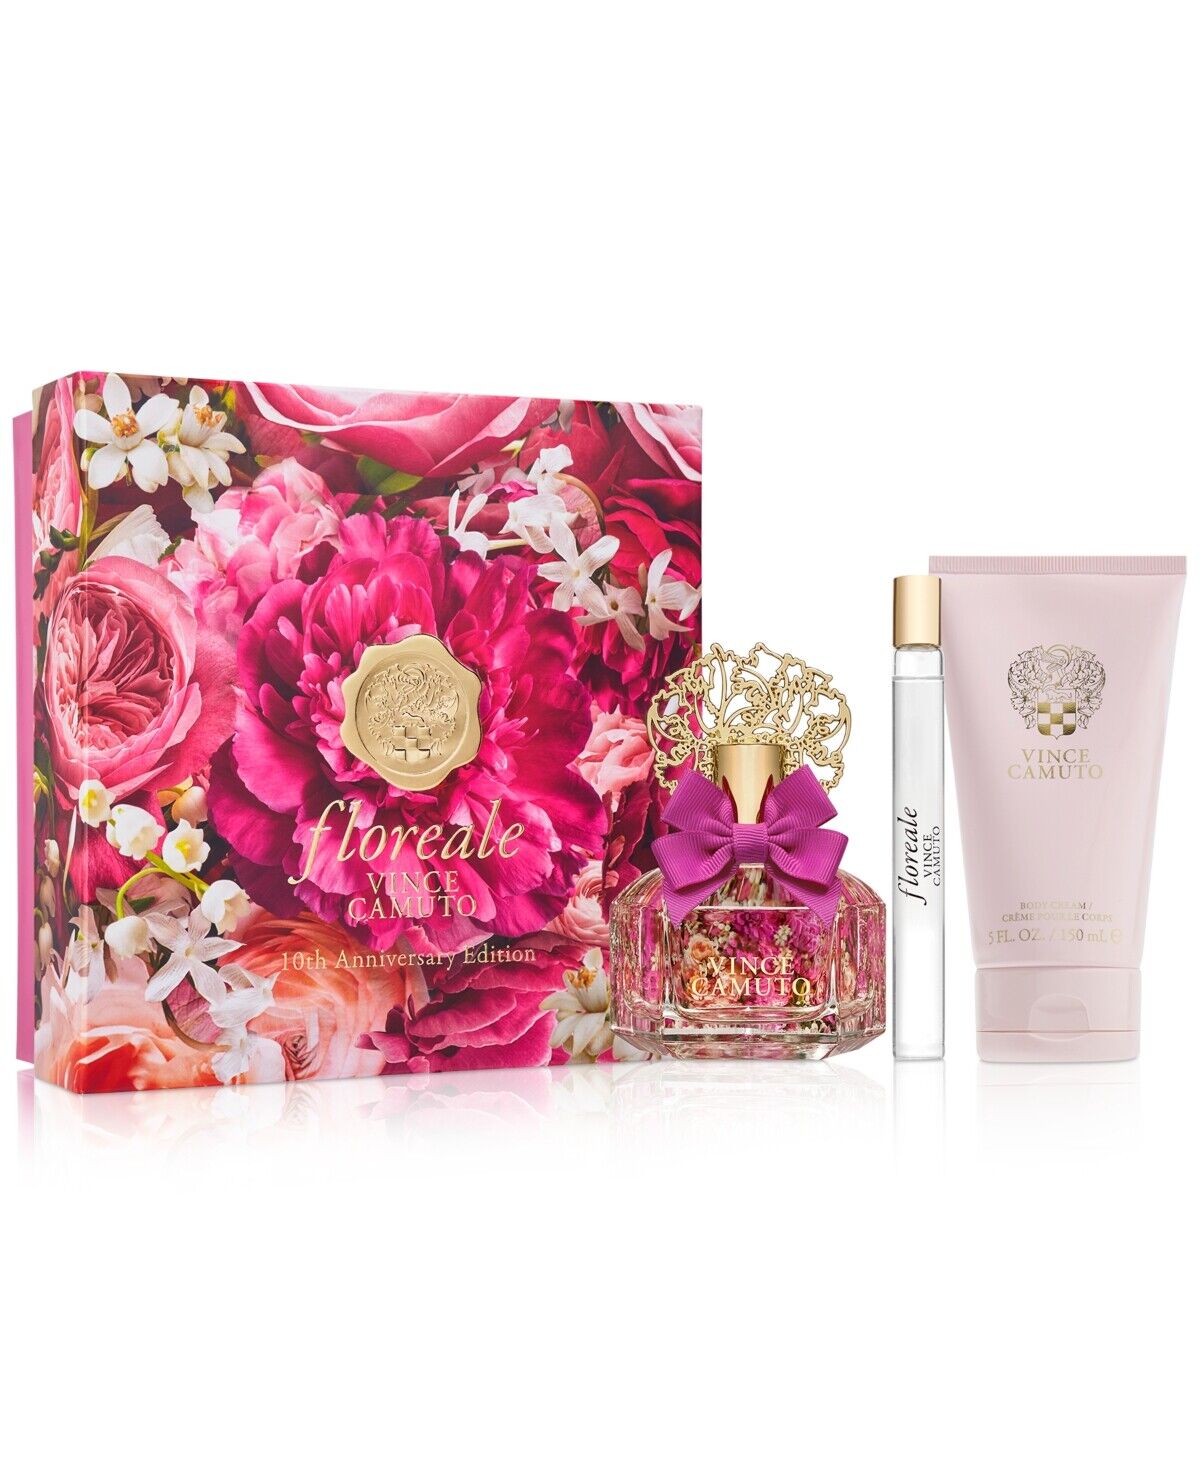 Vince Camuto Amore 3.4 oz Fragrance Gift Set – Face and Body Shoppe